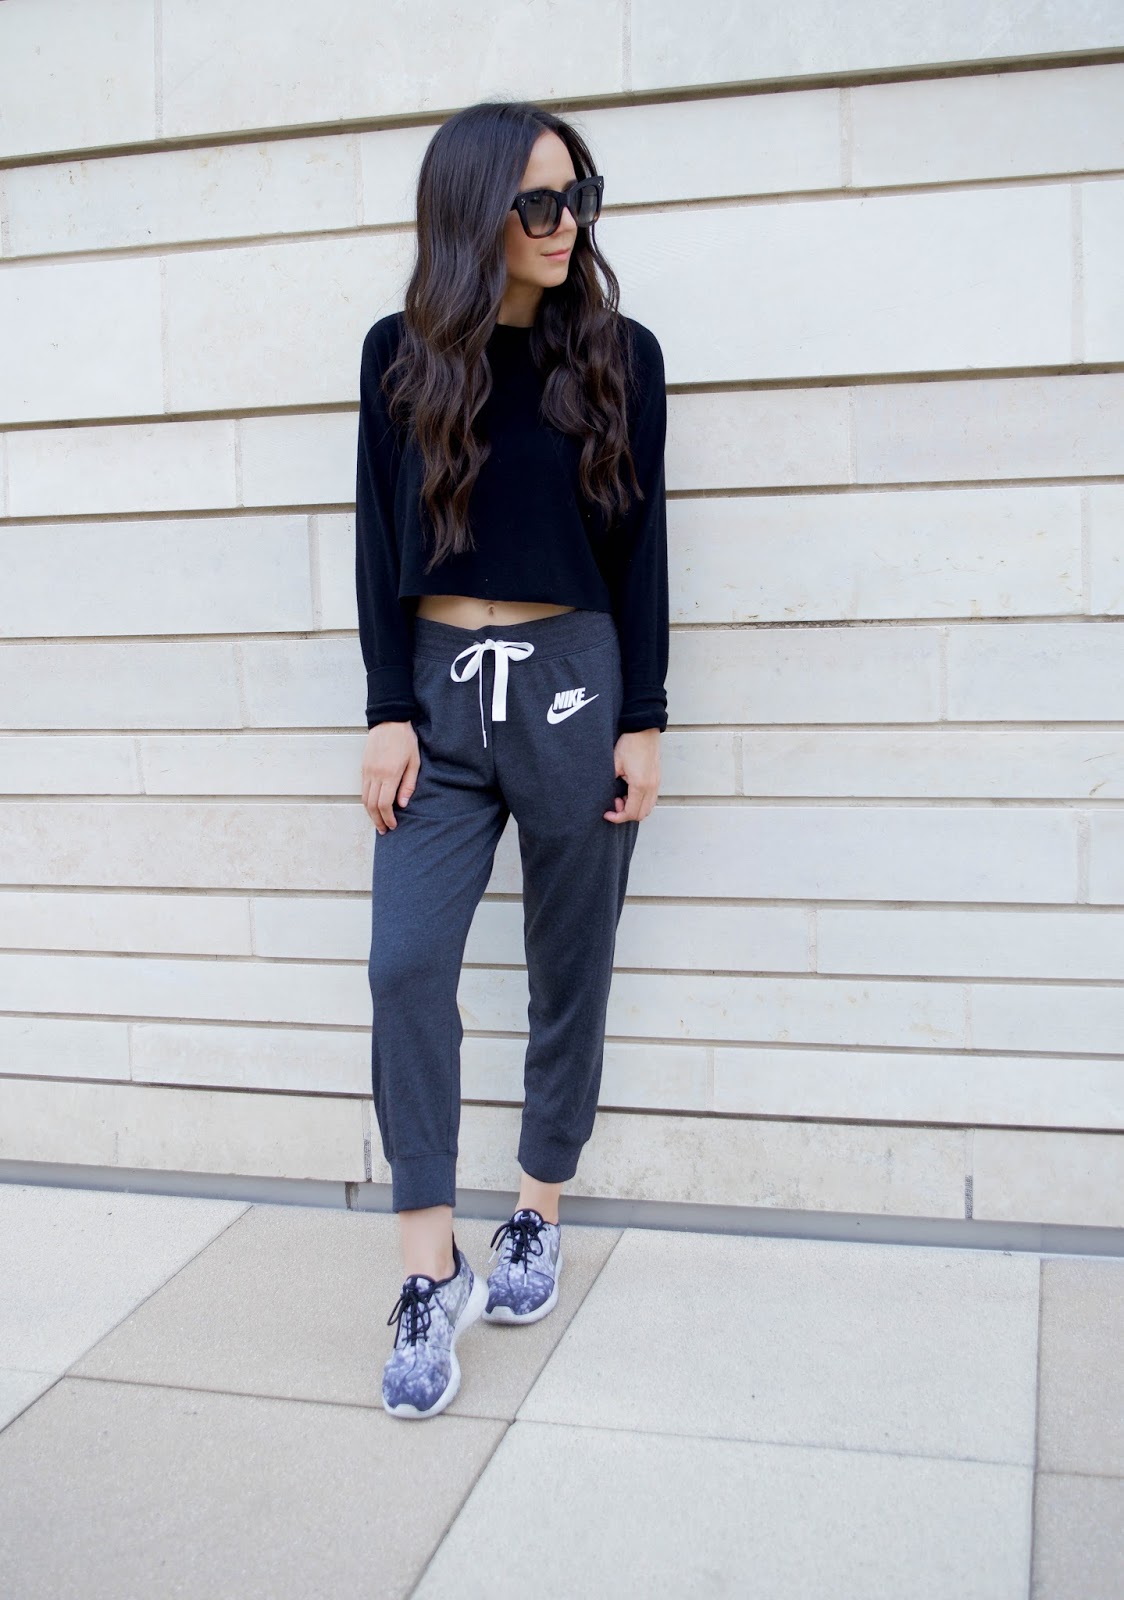 The Athleisure Trend